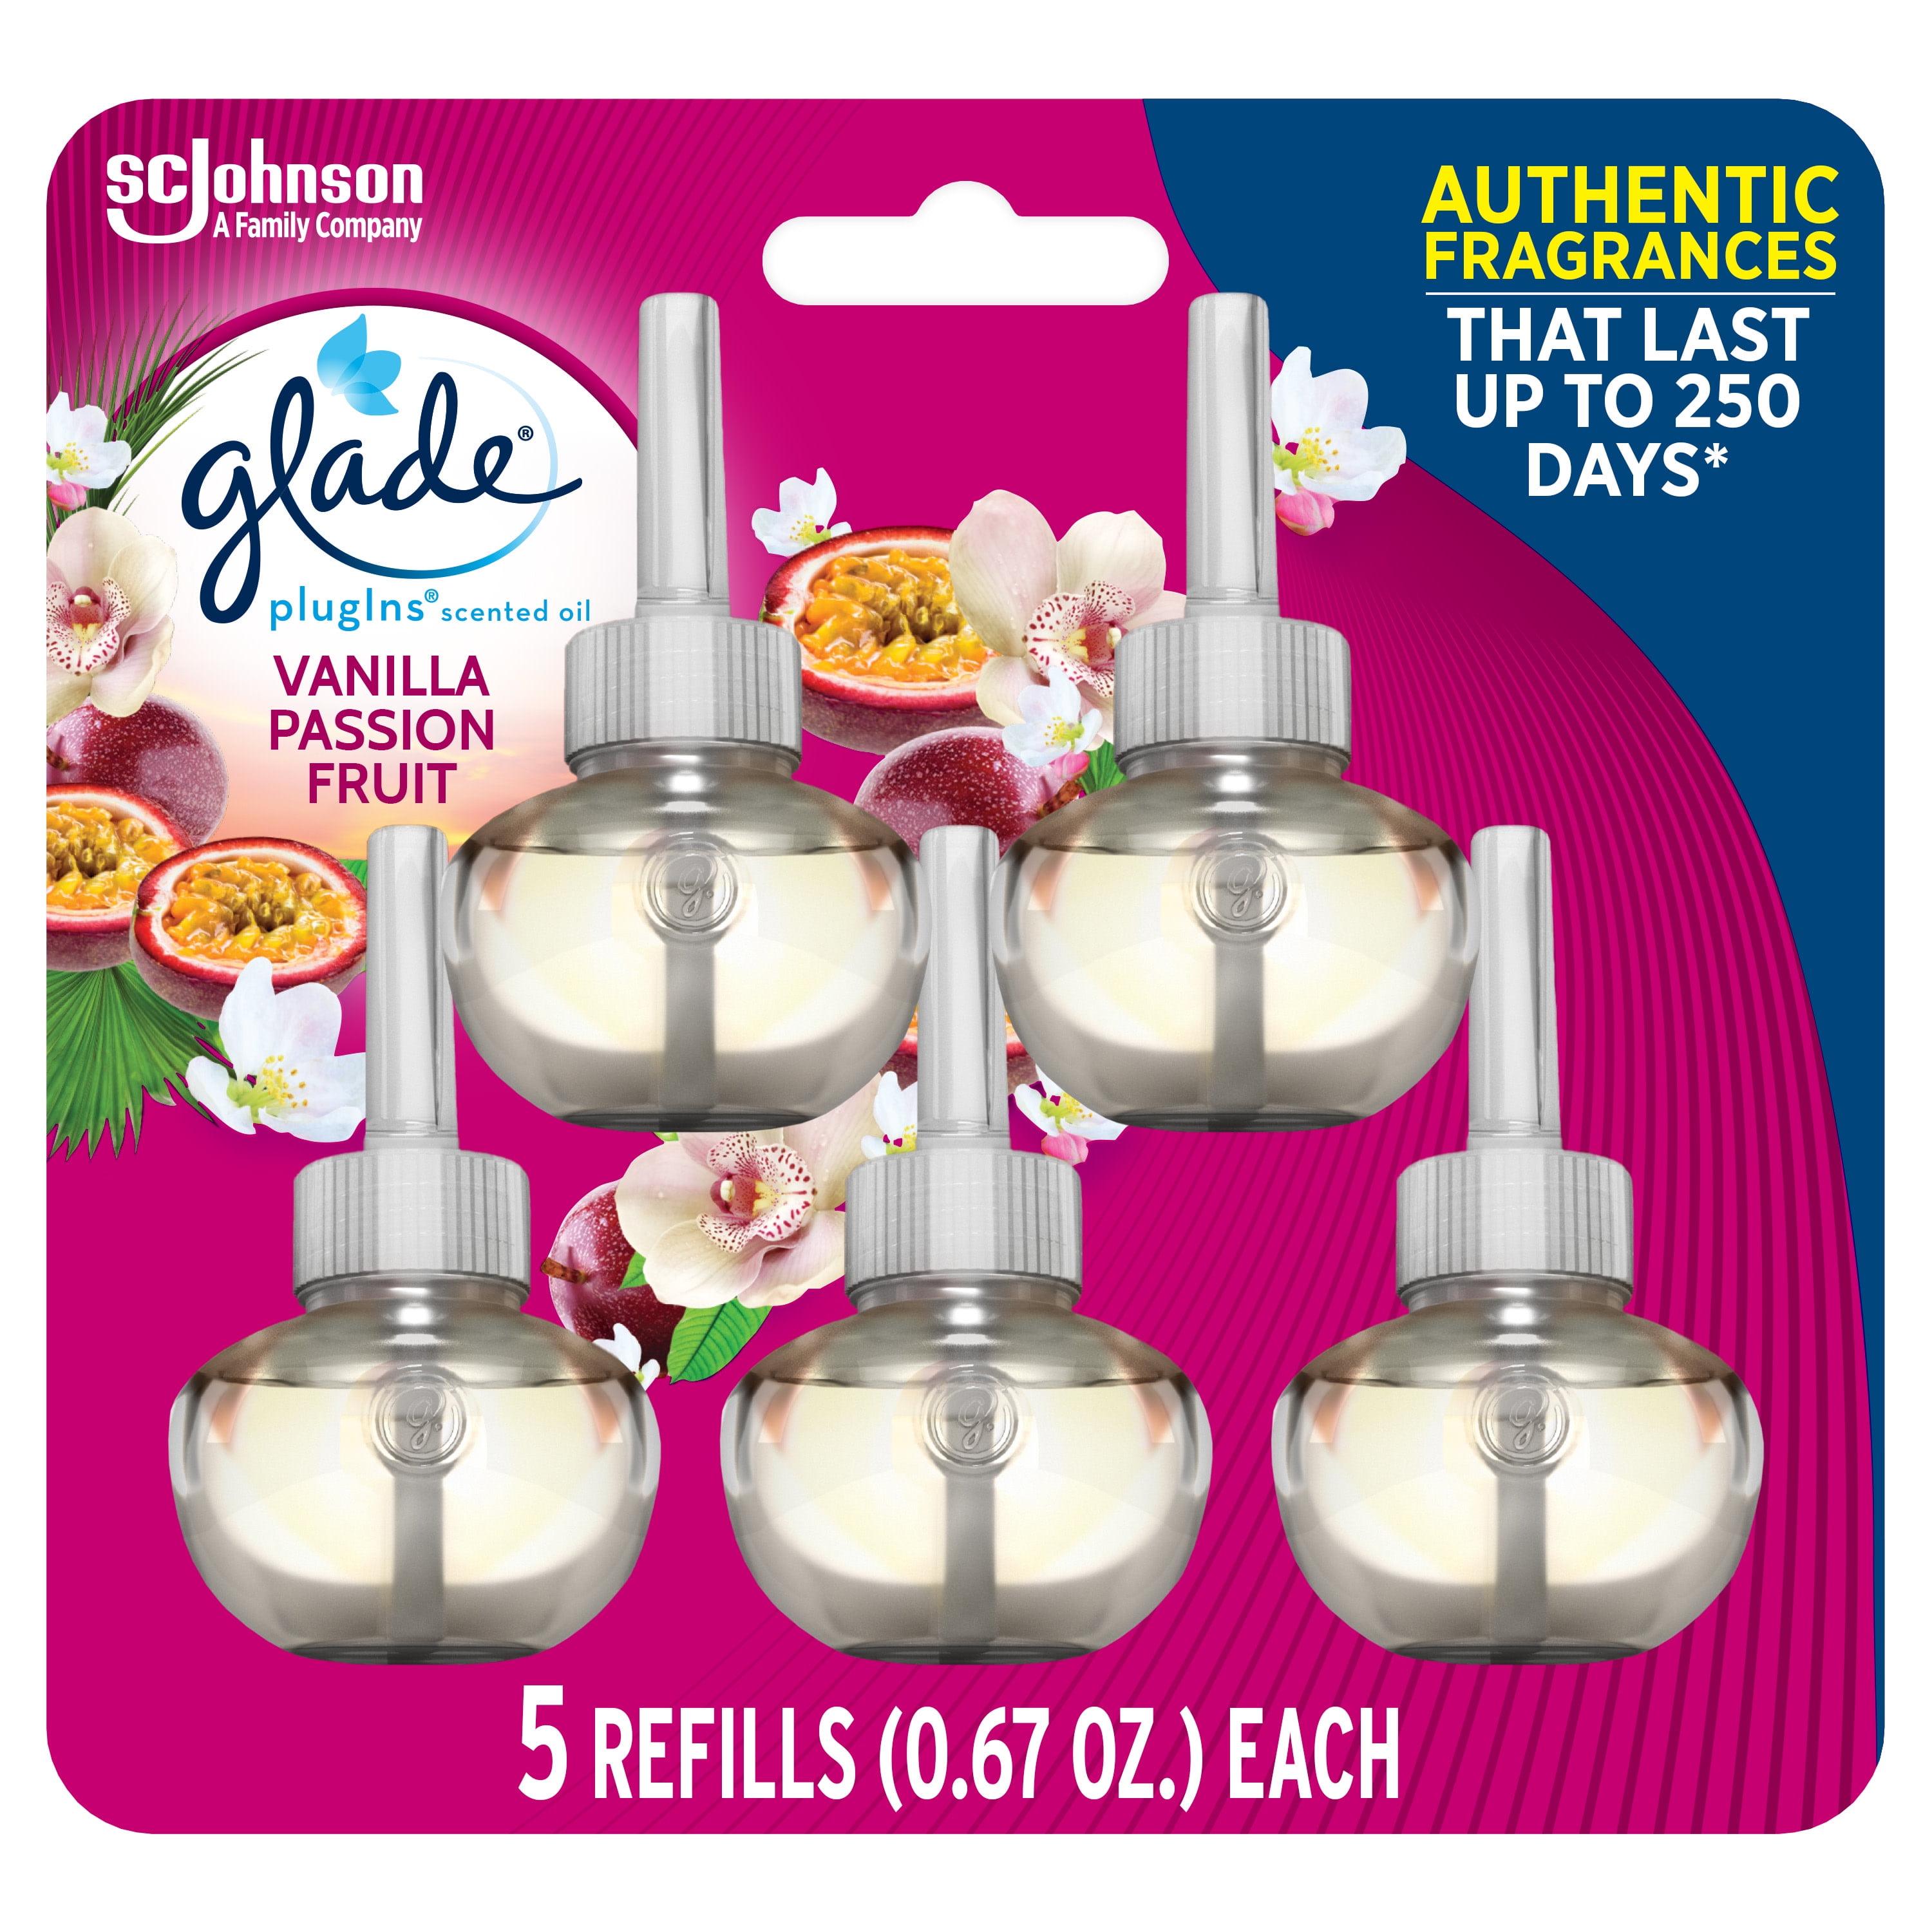 Glade PlugIns Refill 5 CT, Vanilla Passion Fruit, 3.35 FL. OZ. Total, Scented Oil Air Freshener Infused with Essential Oils